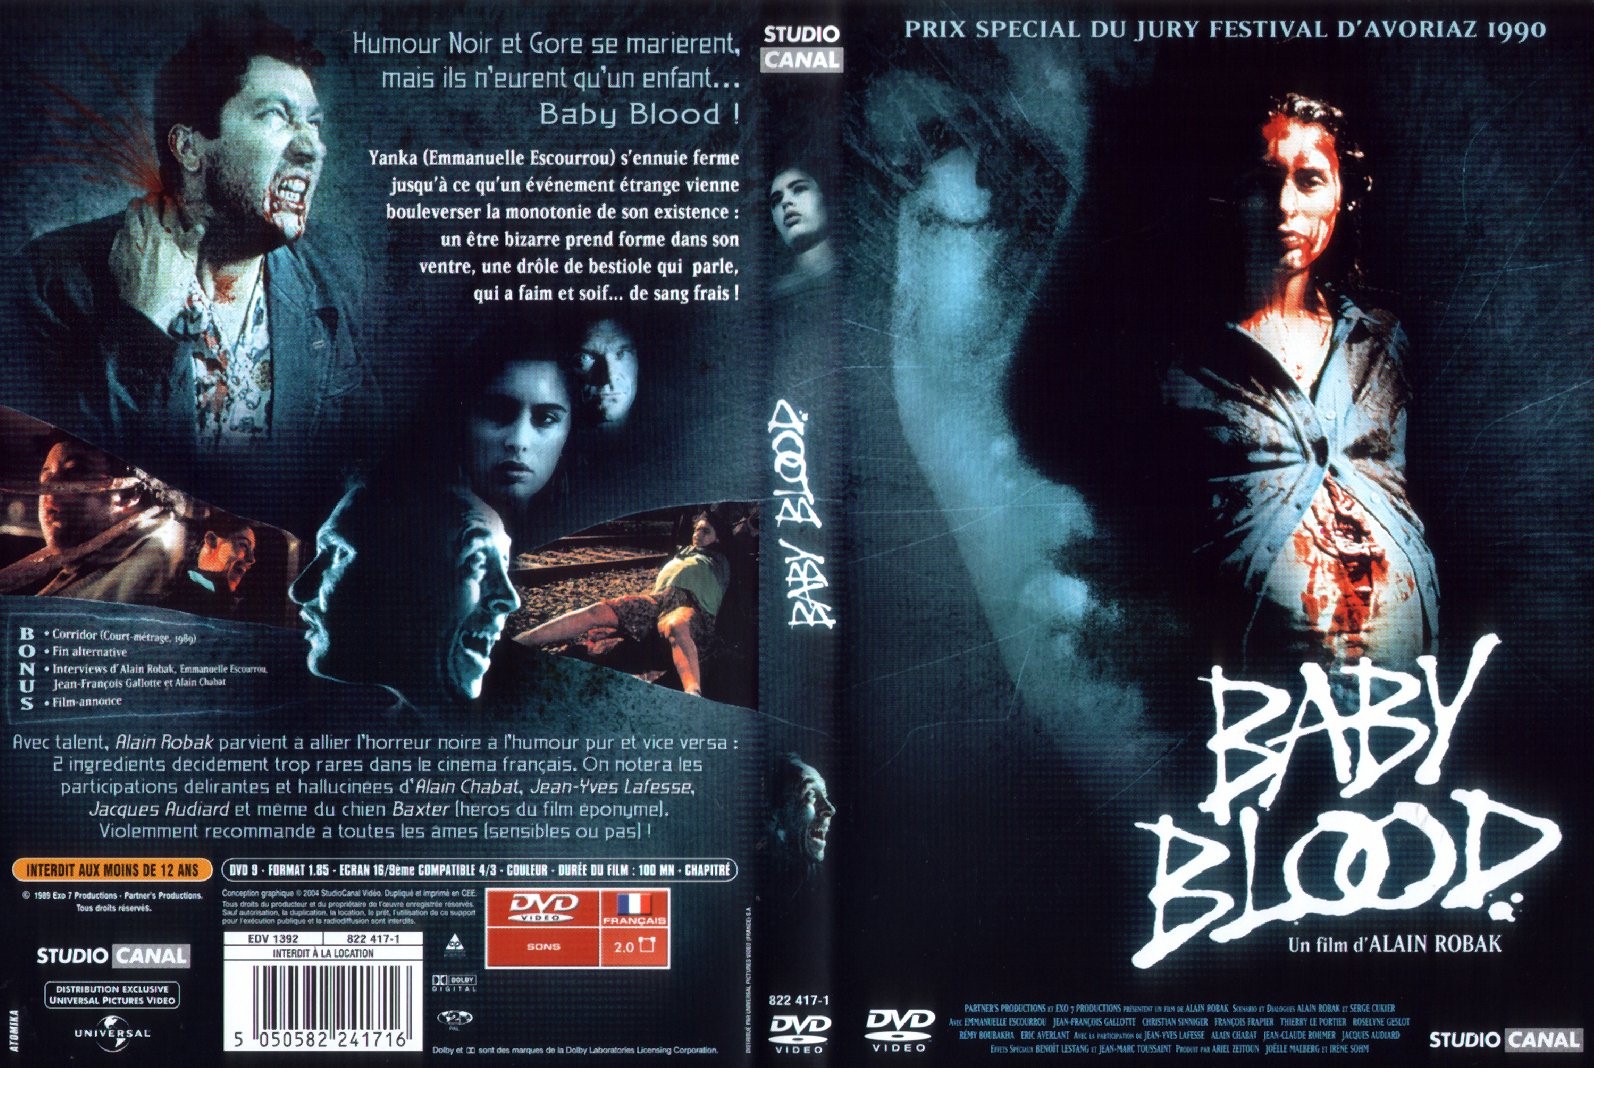 Jaquette DVD Baby blood